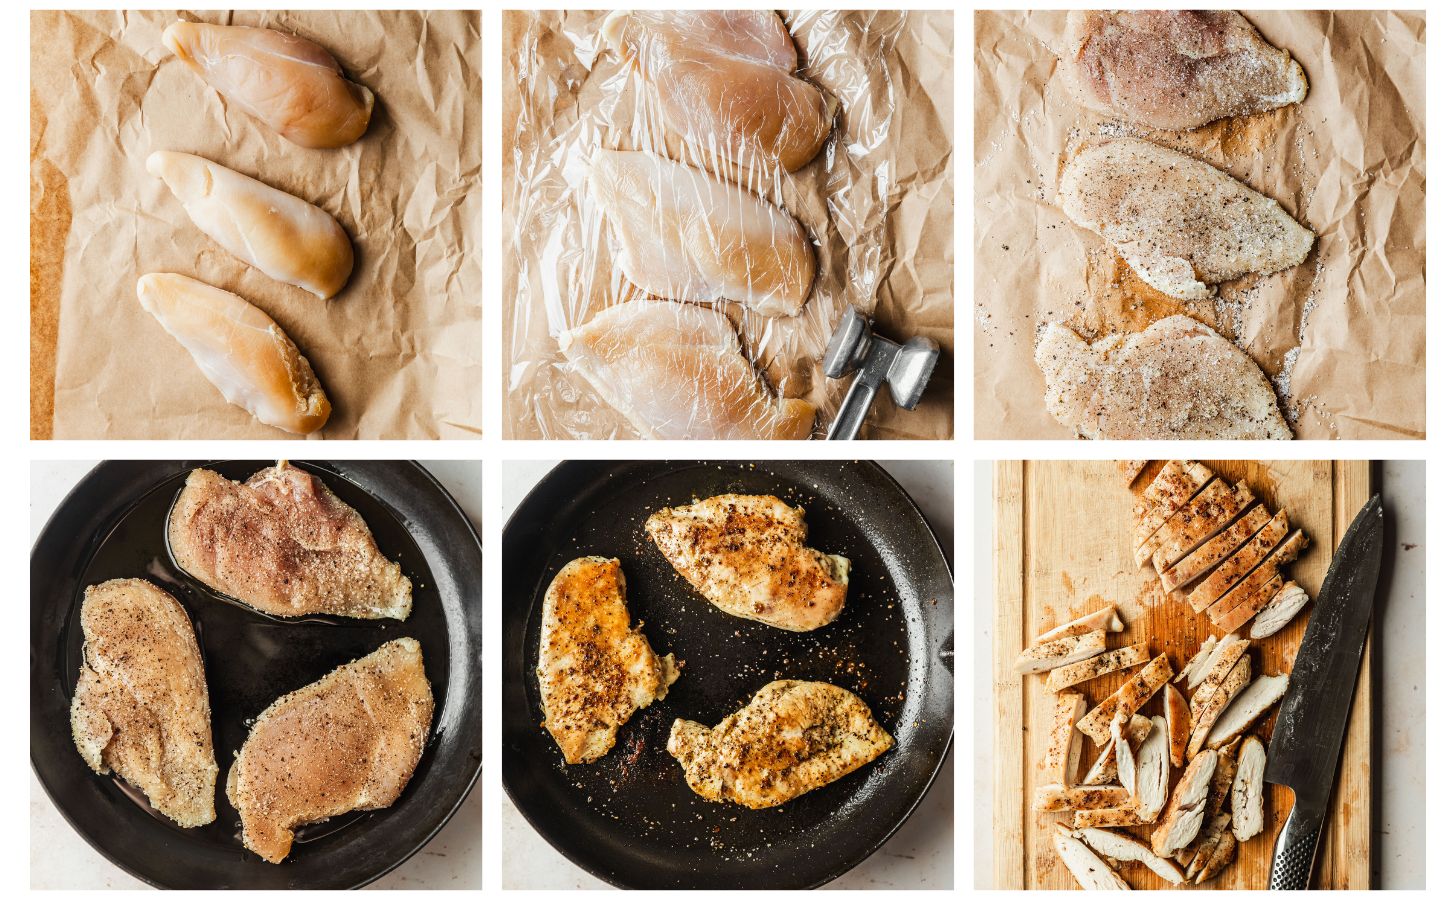 Six steps to searing chicken. In photo 1, chicken breasts on parchment paper. In photo 2, the chicken breasts are tenderized. In photo 3, the chicken has salt and pepper. In photo 4, raw chicken is in a black pan. In photo 5, the chicken is cooked. In photo 6, the chicken is chopped on a wood board.